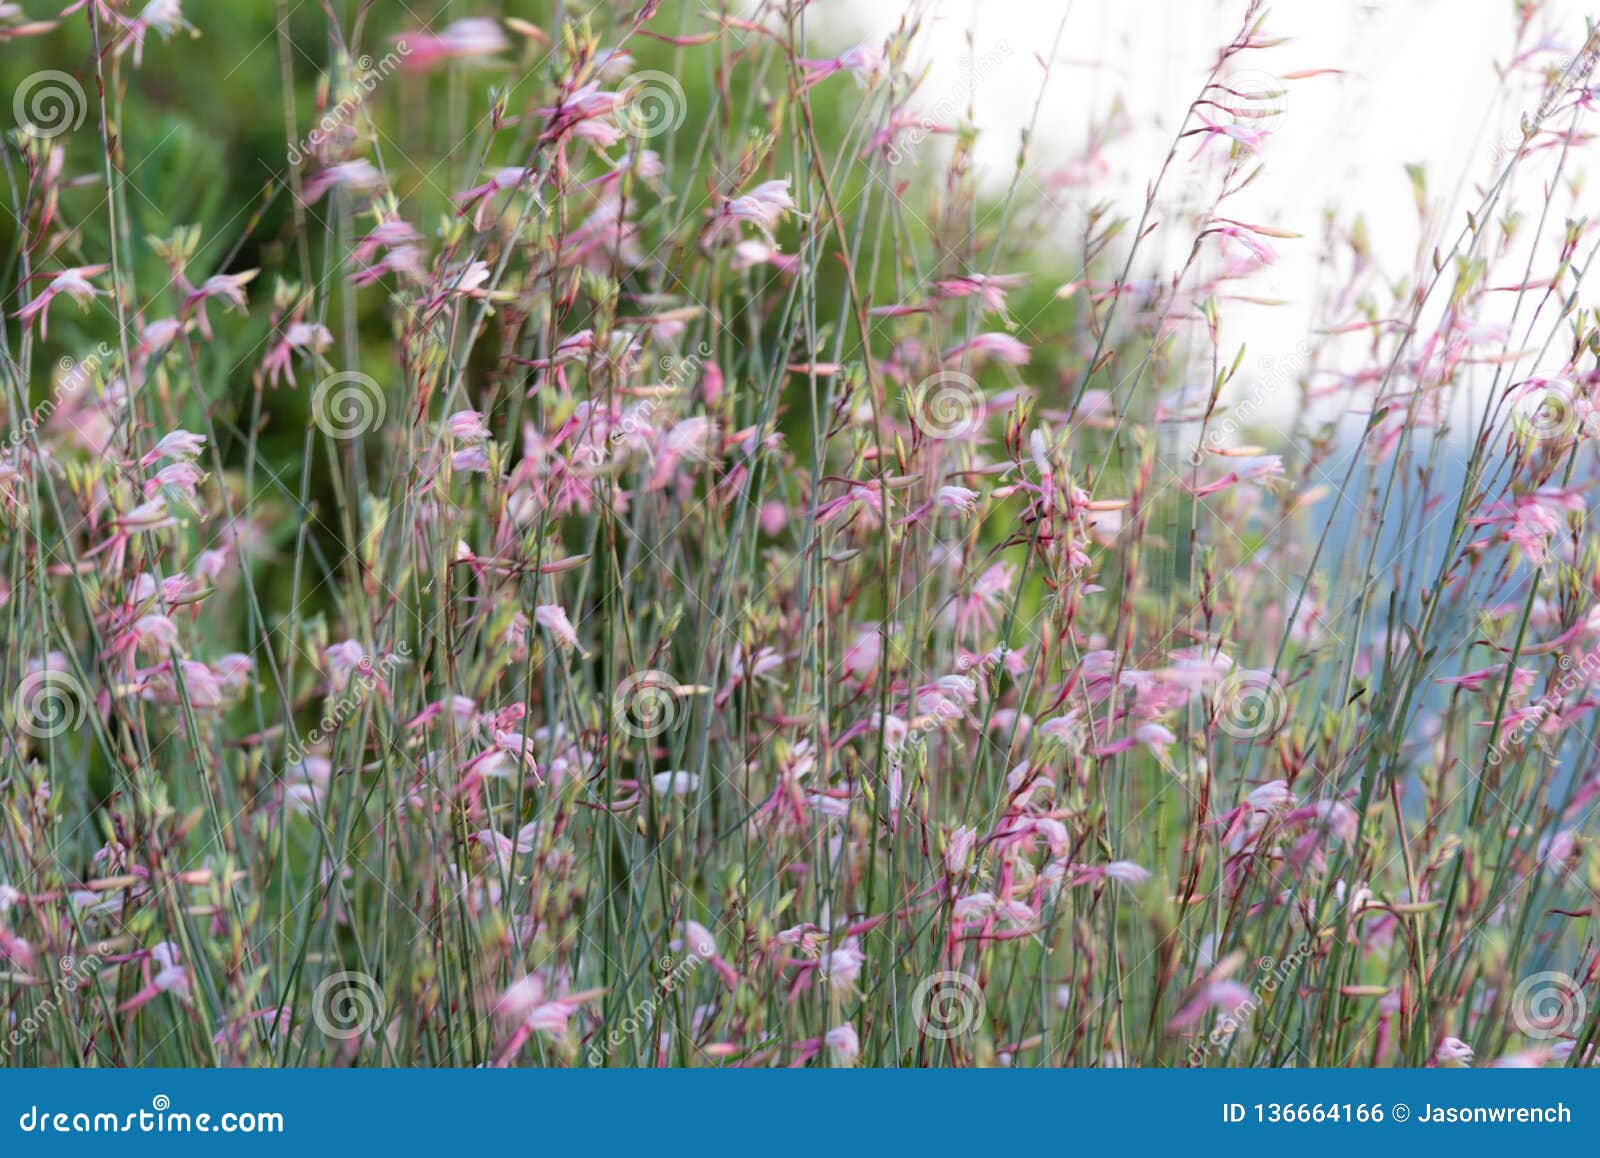 gaura belleza flowers moving in the wind